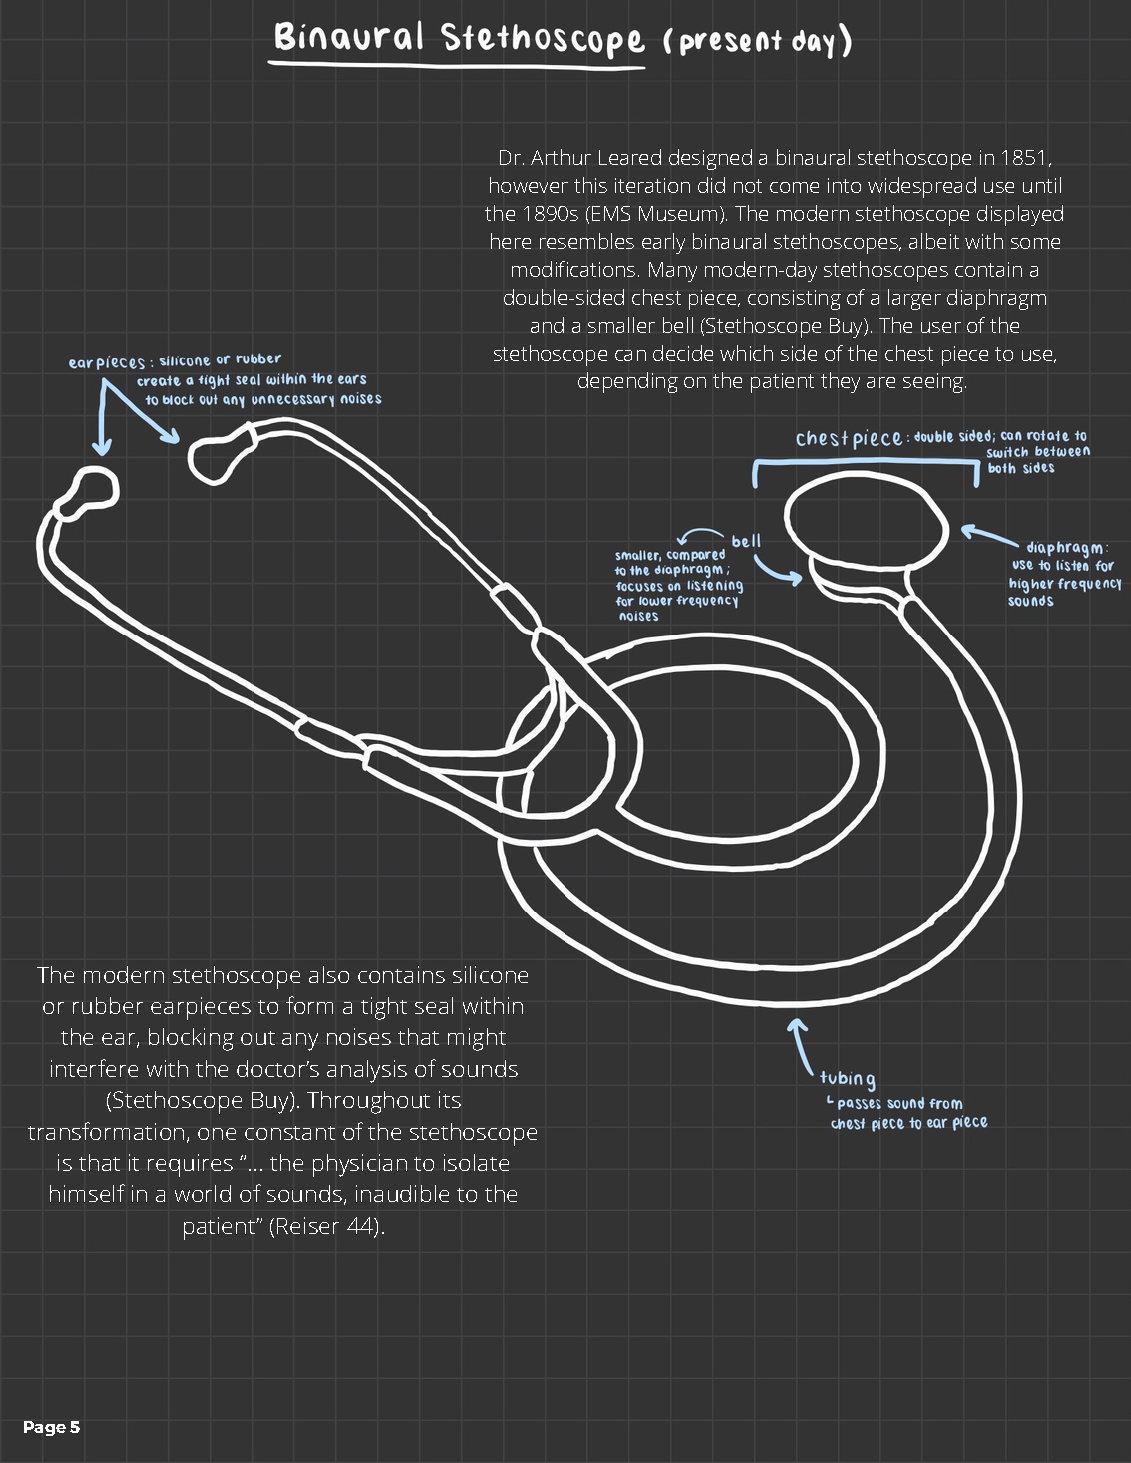 Medical diagram of Binaural Stethoscope (present day). The annotations indicate that it has two ear pieces of silicone or rubber, that create a tight seal within the ears to block out any unnecessary noises. It also has a chest piece, double sided, that can rotate to switch between both sides; a diaphragm, used to listen for higher frequency sounds; a bell, smaller, compared to the diaphragm, that focuses on listening for lower frequency sounds; and a tubing, that passes sound from chest piece to ear piece